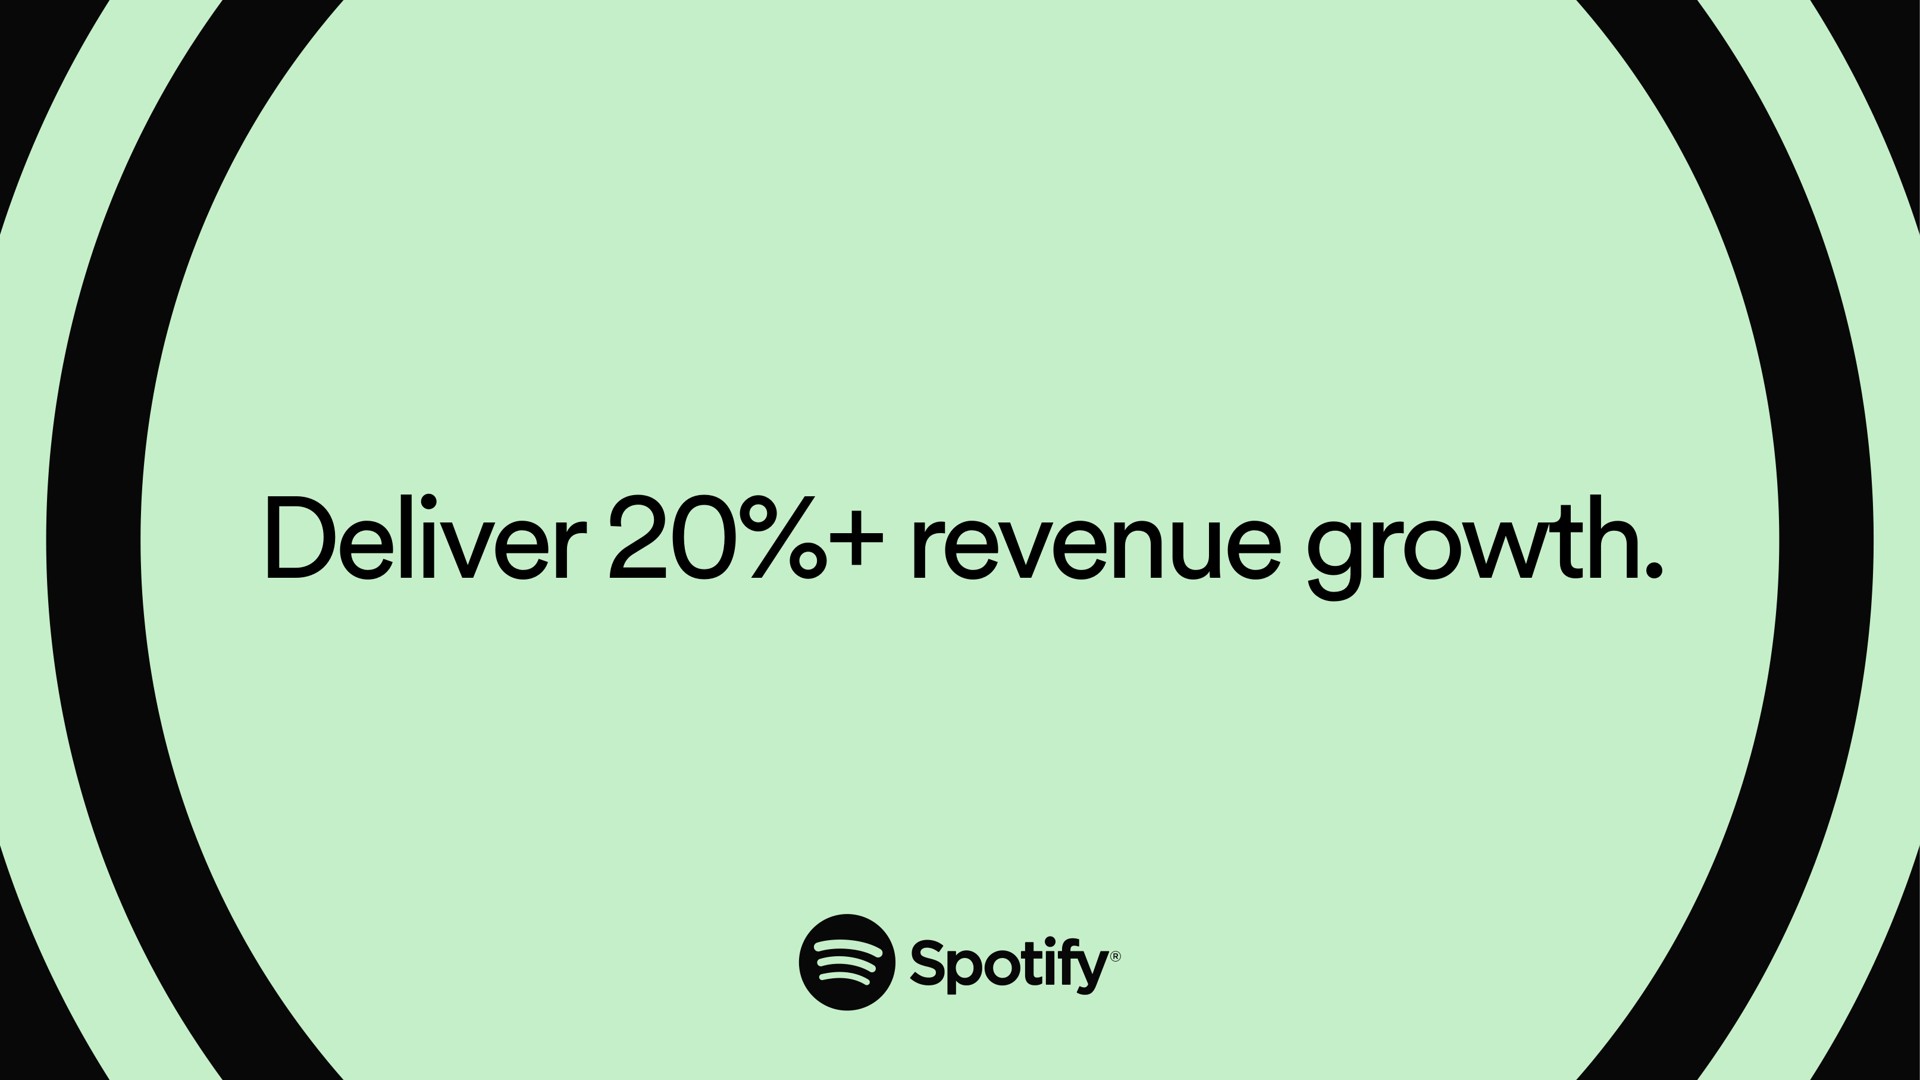 deliver revenue growth | Spotify